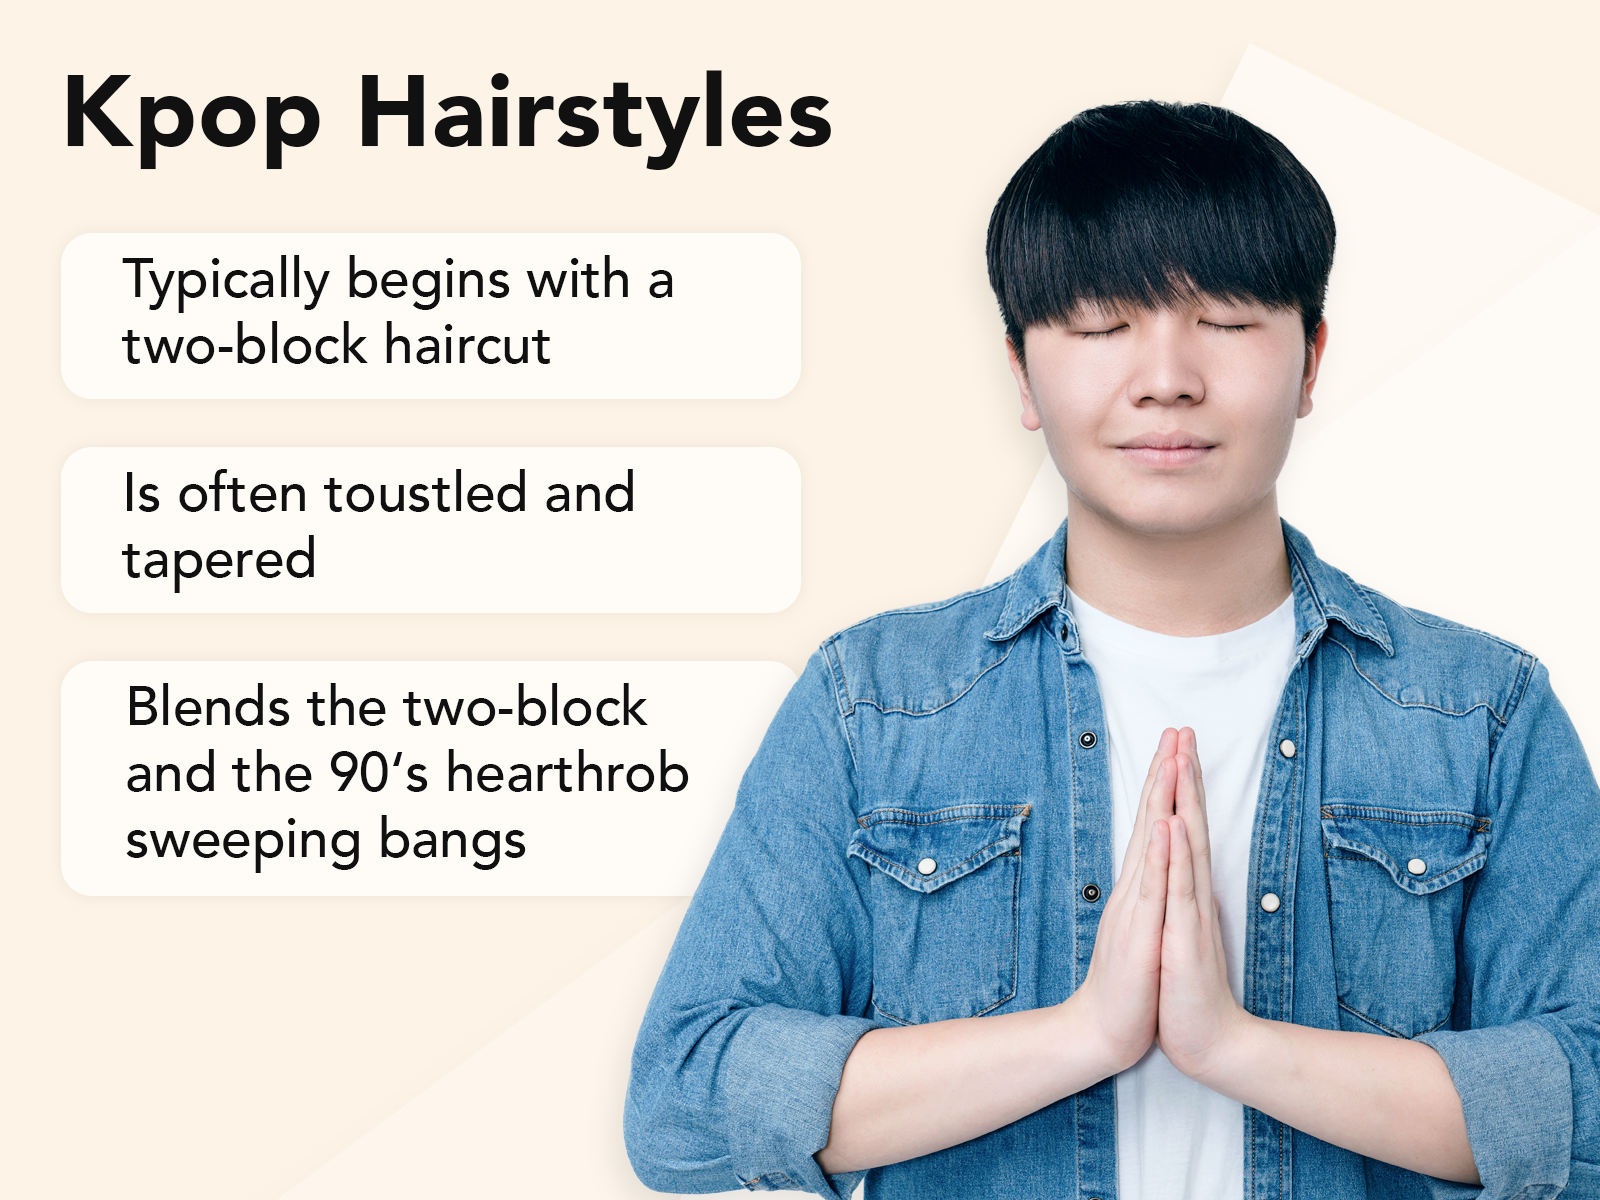 Trendy Kpop Hairstyles explainer image on a tan background